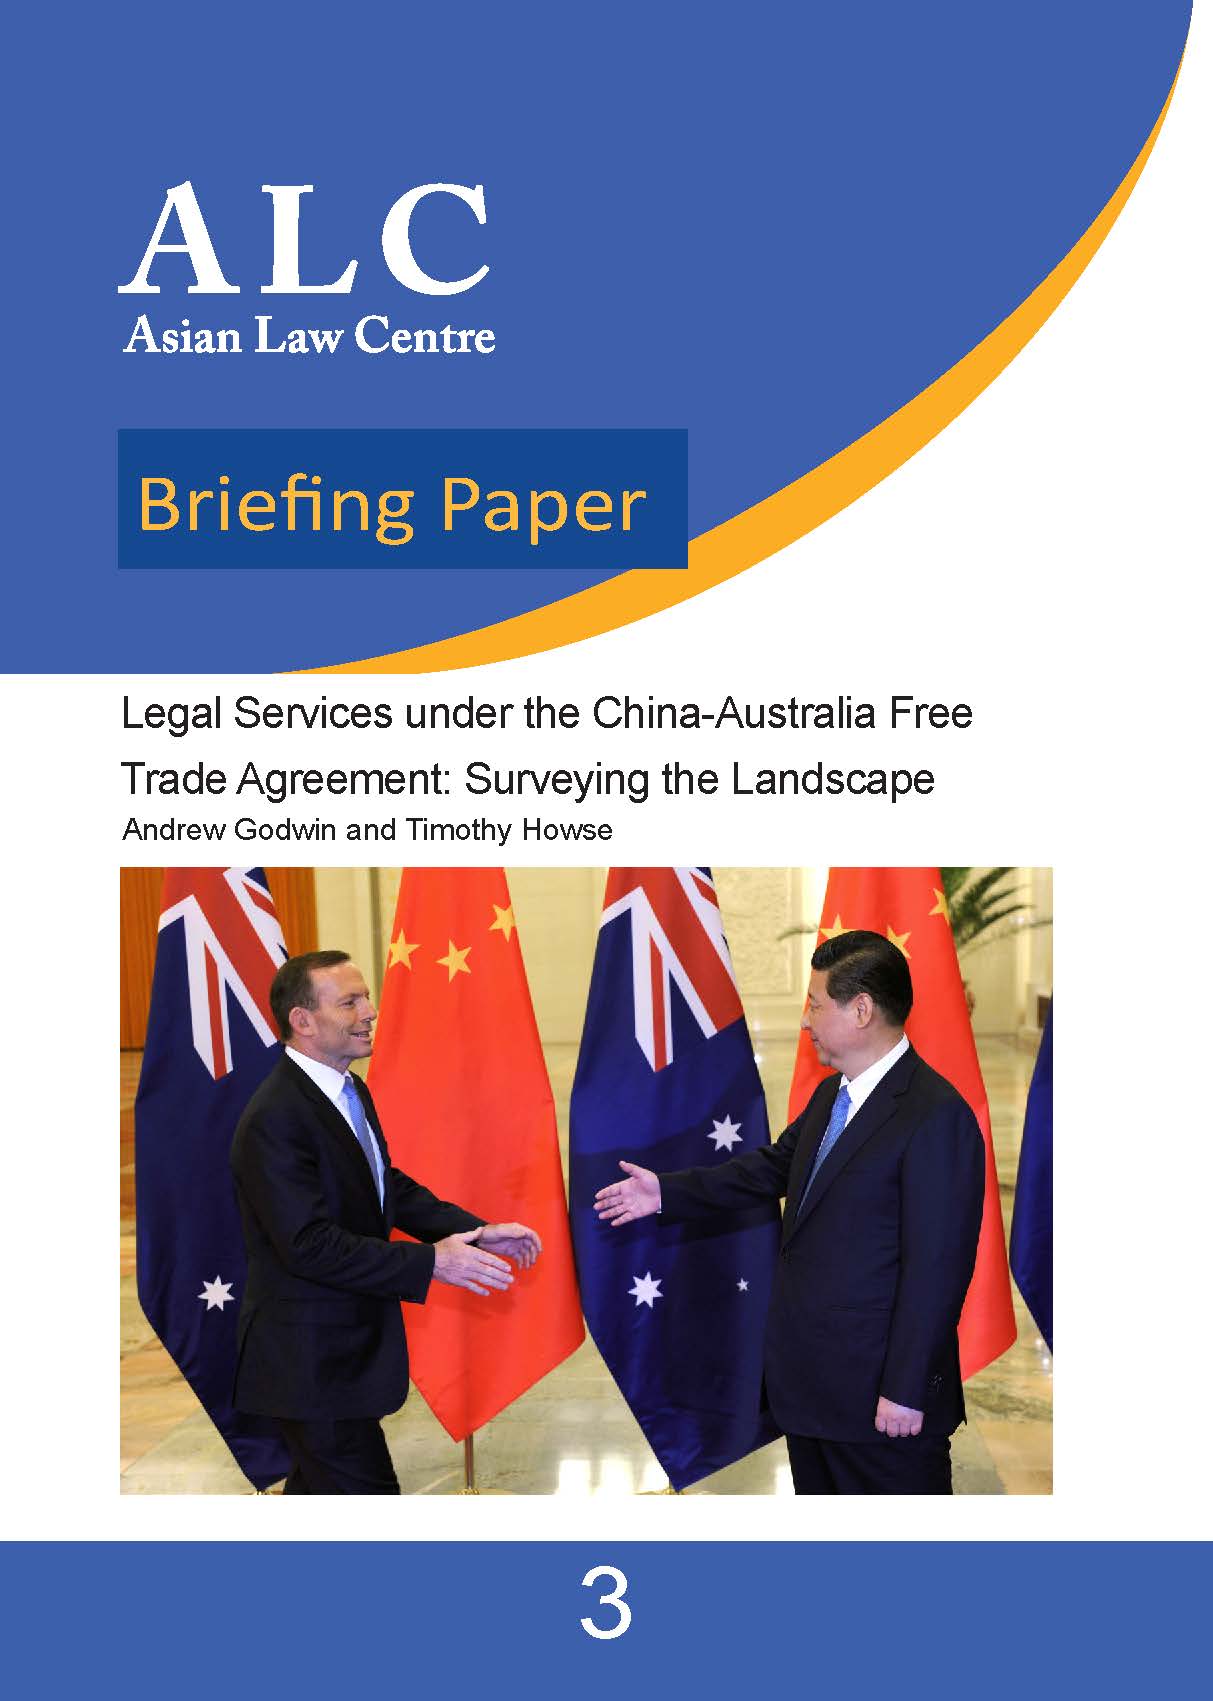 Legal Services under the China-Australia Free Trade Agreement: Surveying the Landscape